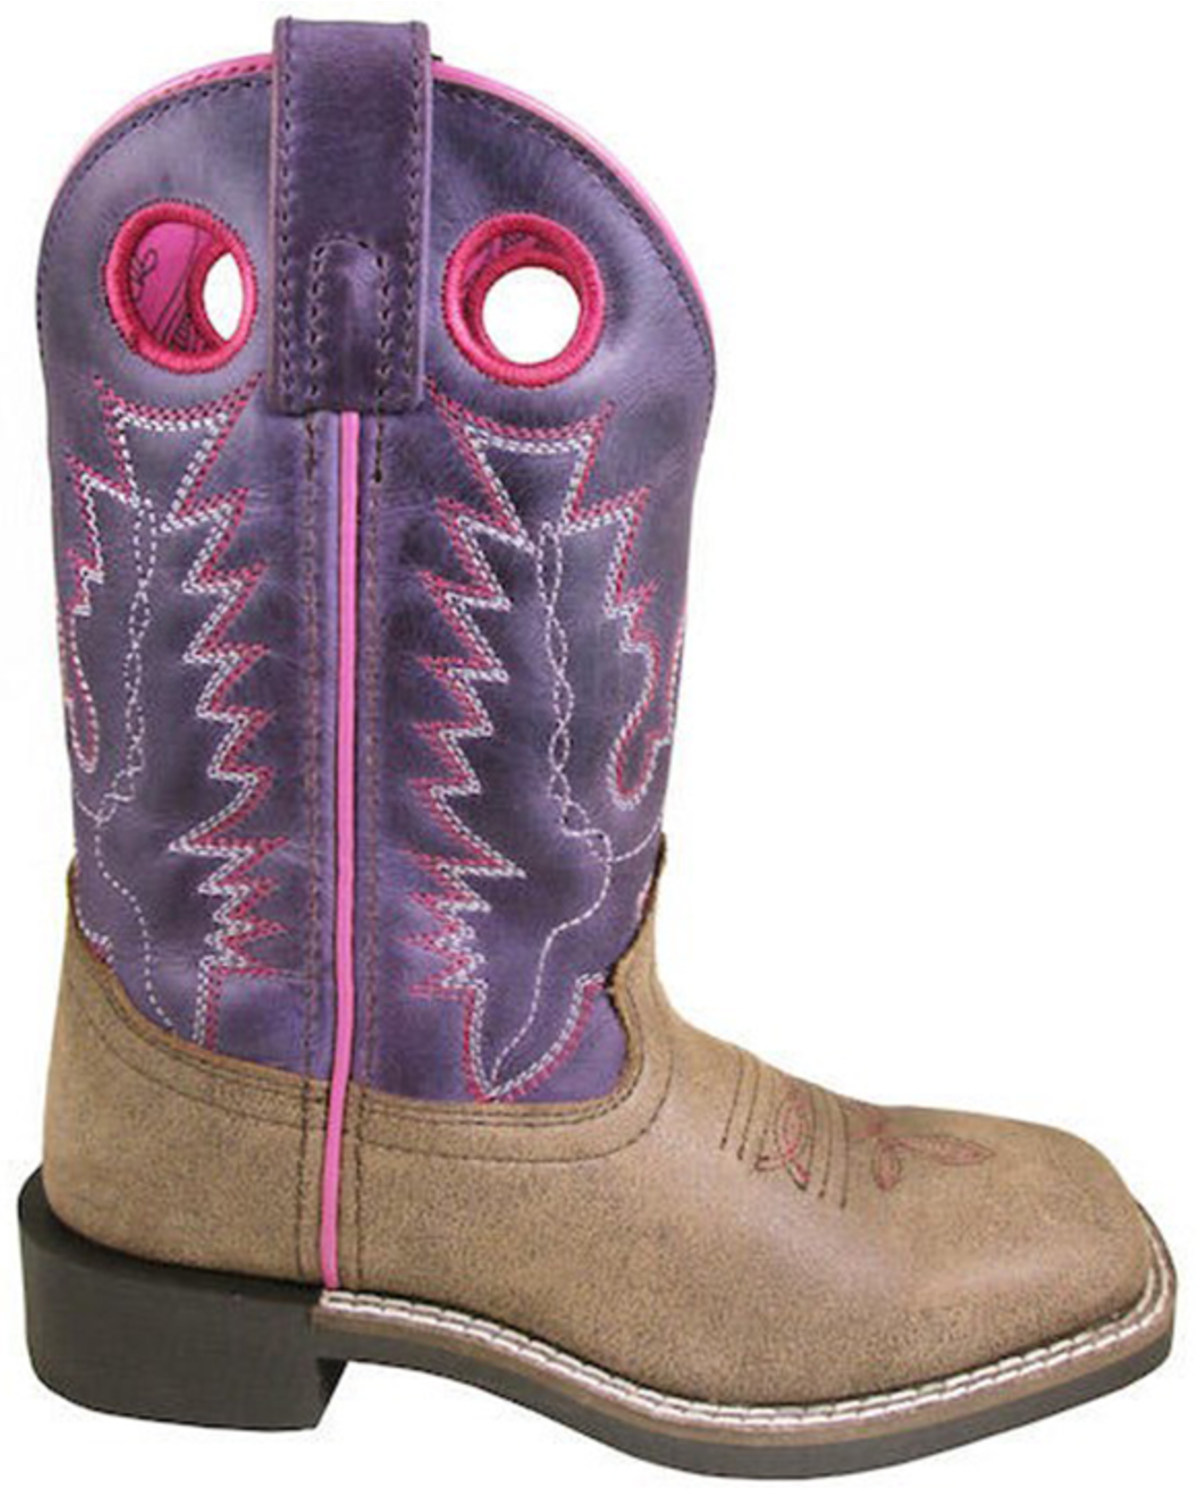 Smoky Mountain Toddler Girls' Tracie Western Boots - Broad Square Toe